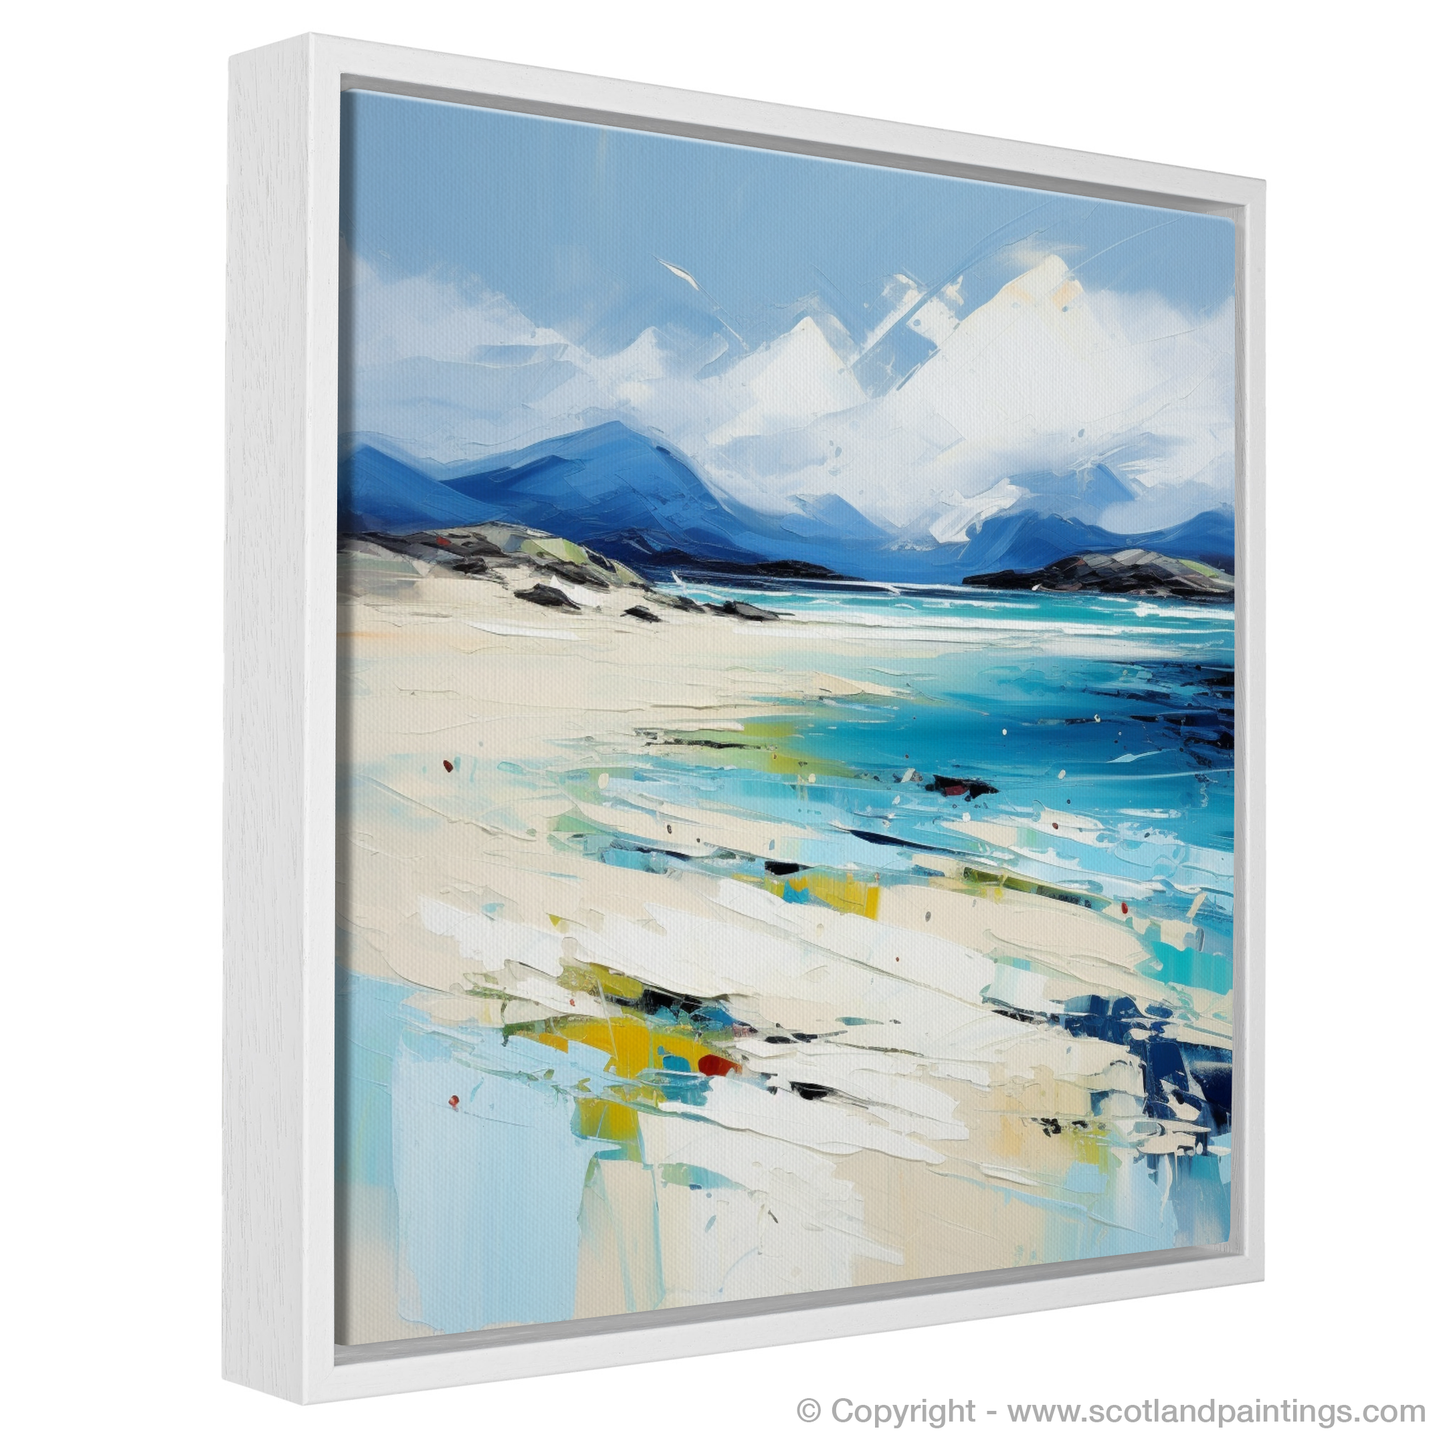 Painting and Art Print of Luskentyre Beach, Isle of Harris entitled "Luskentyre Beach Reverie: An Expressionist Homage to the Hebridean Coast".